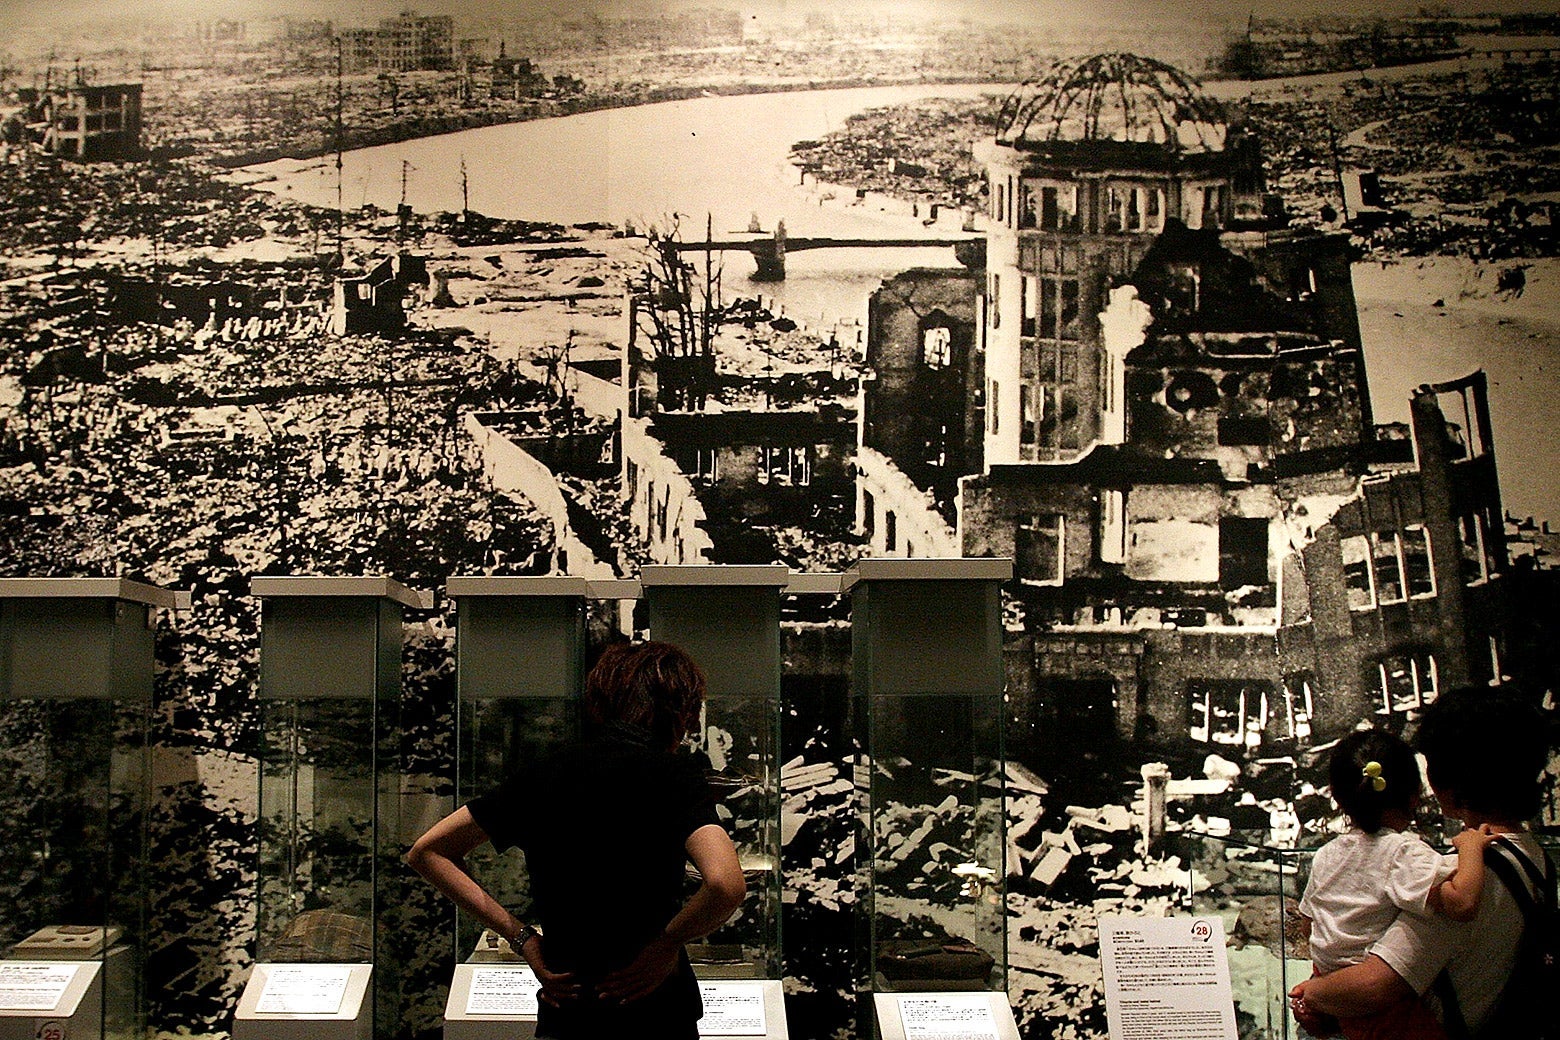 Visitors look at a picture, showing the aftermath of the atomic bomb attack on Hiroshima at the Hiroshima Peace Memorial Park in Japan.